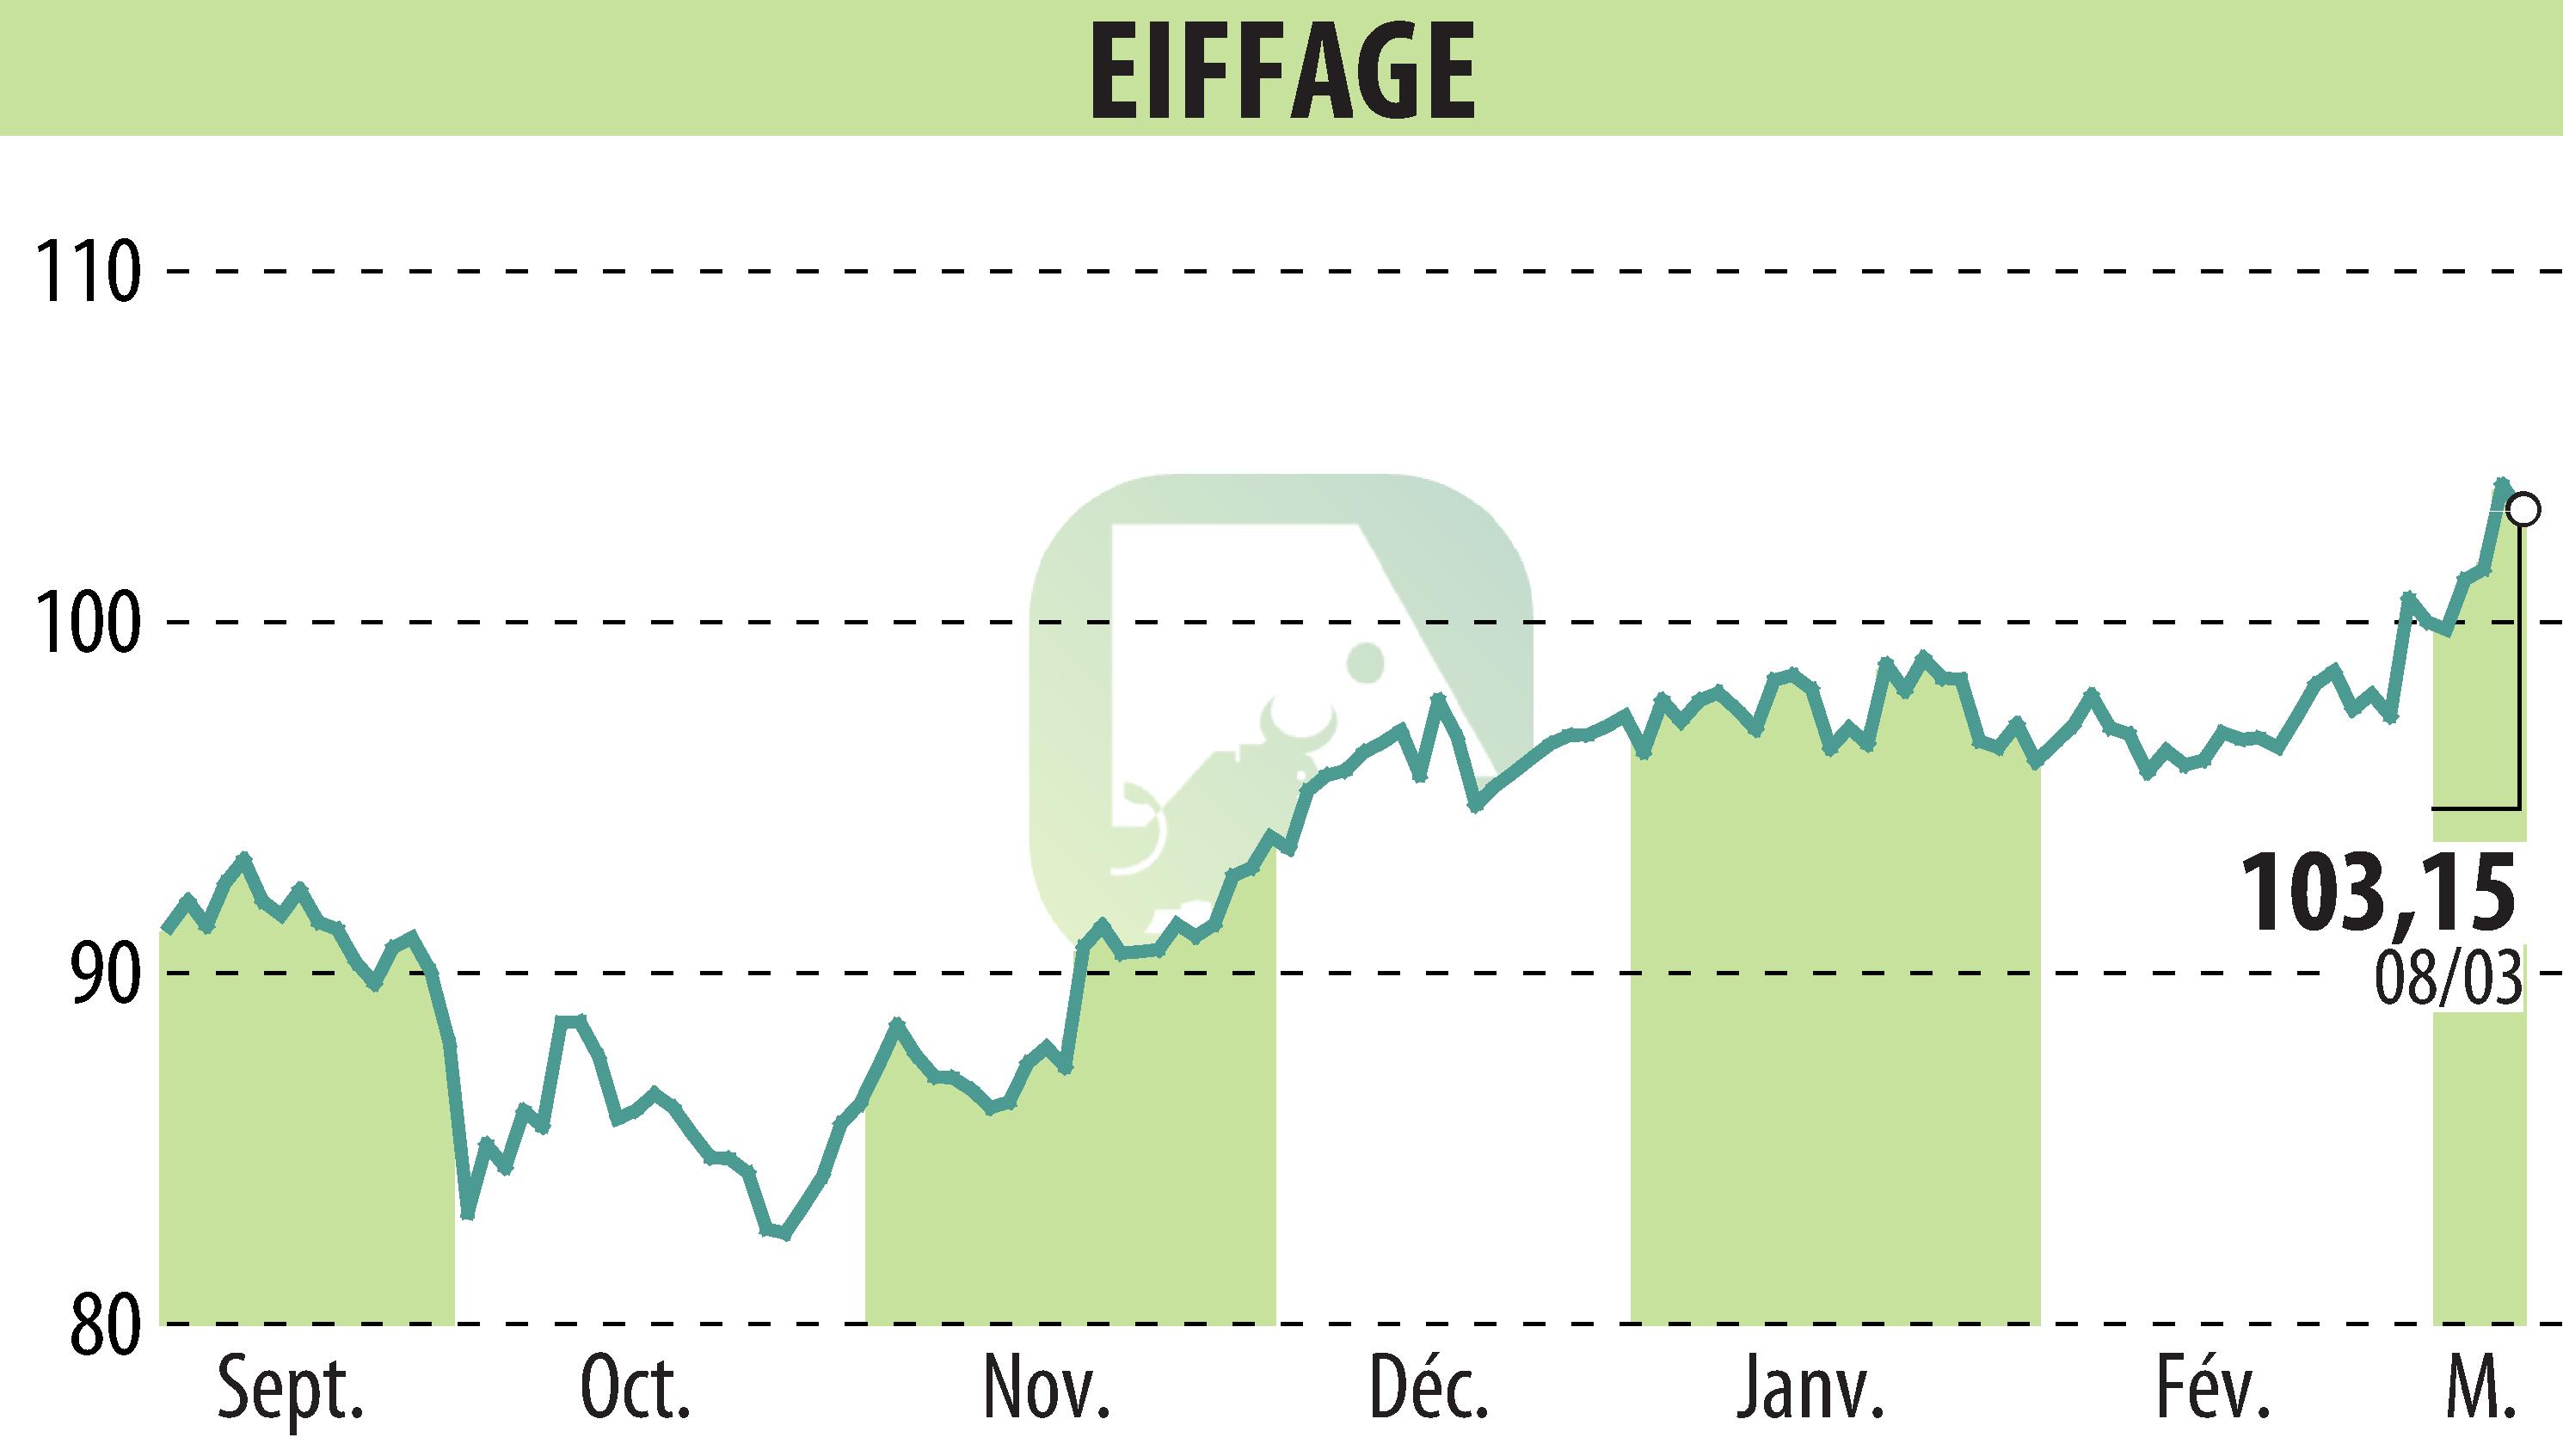 Stock price chart of EIFFAGE (EPA:FGR) showing fluctuations.